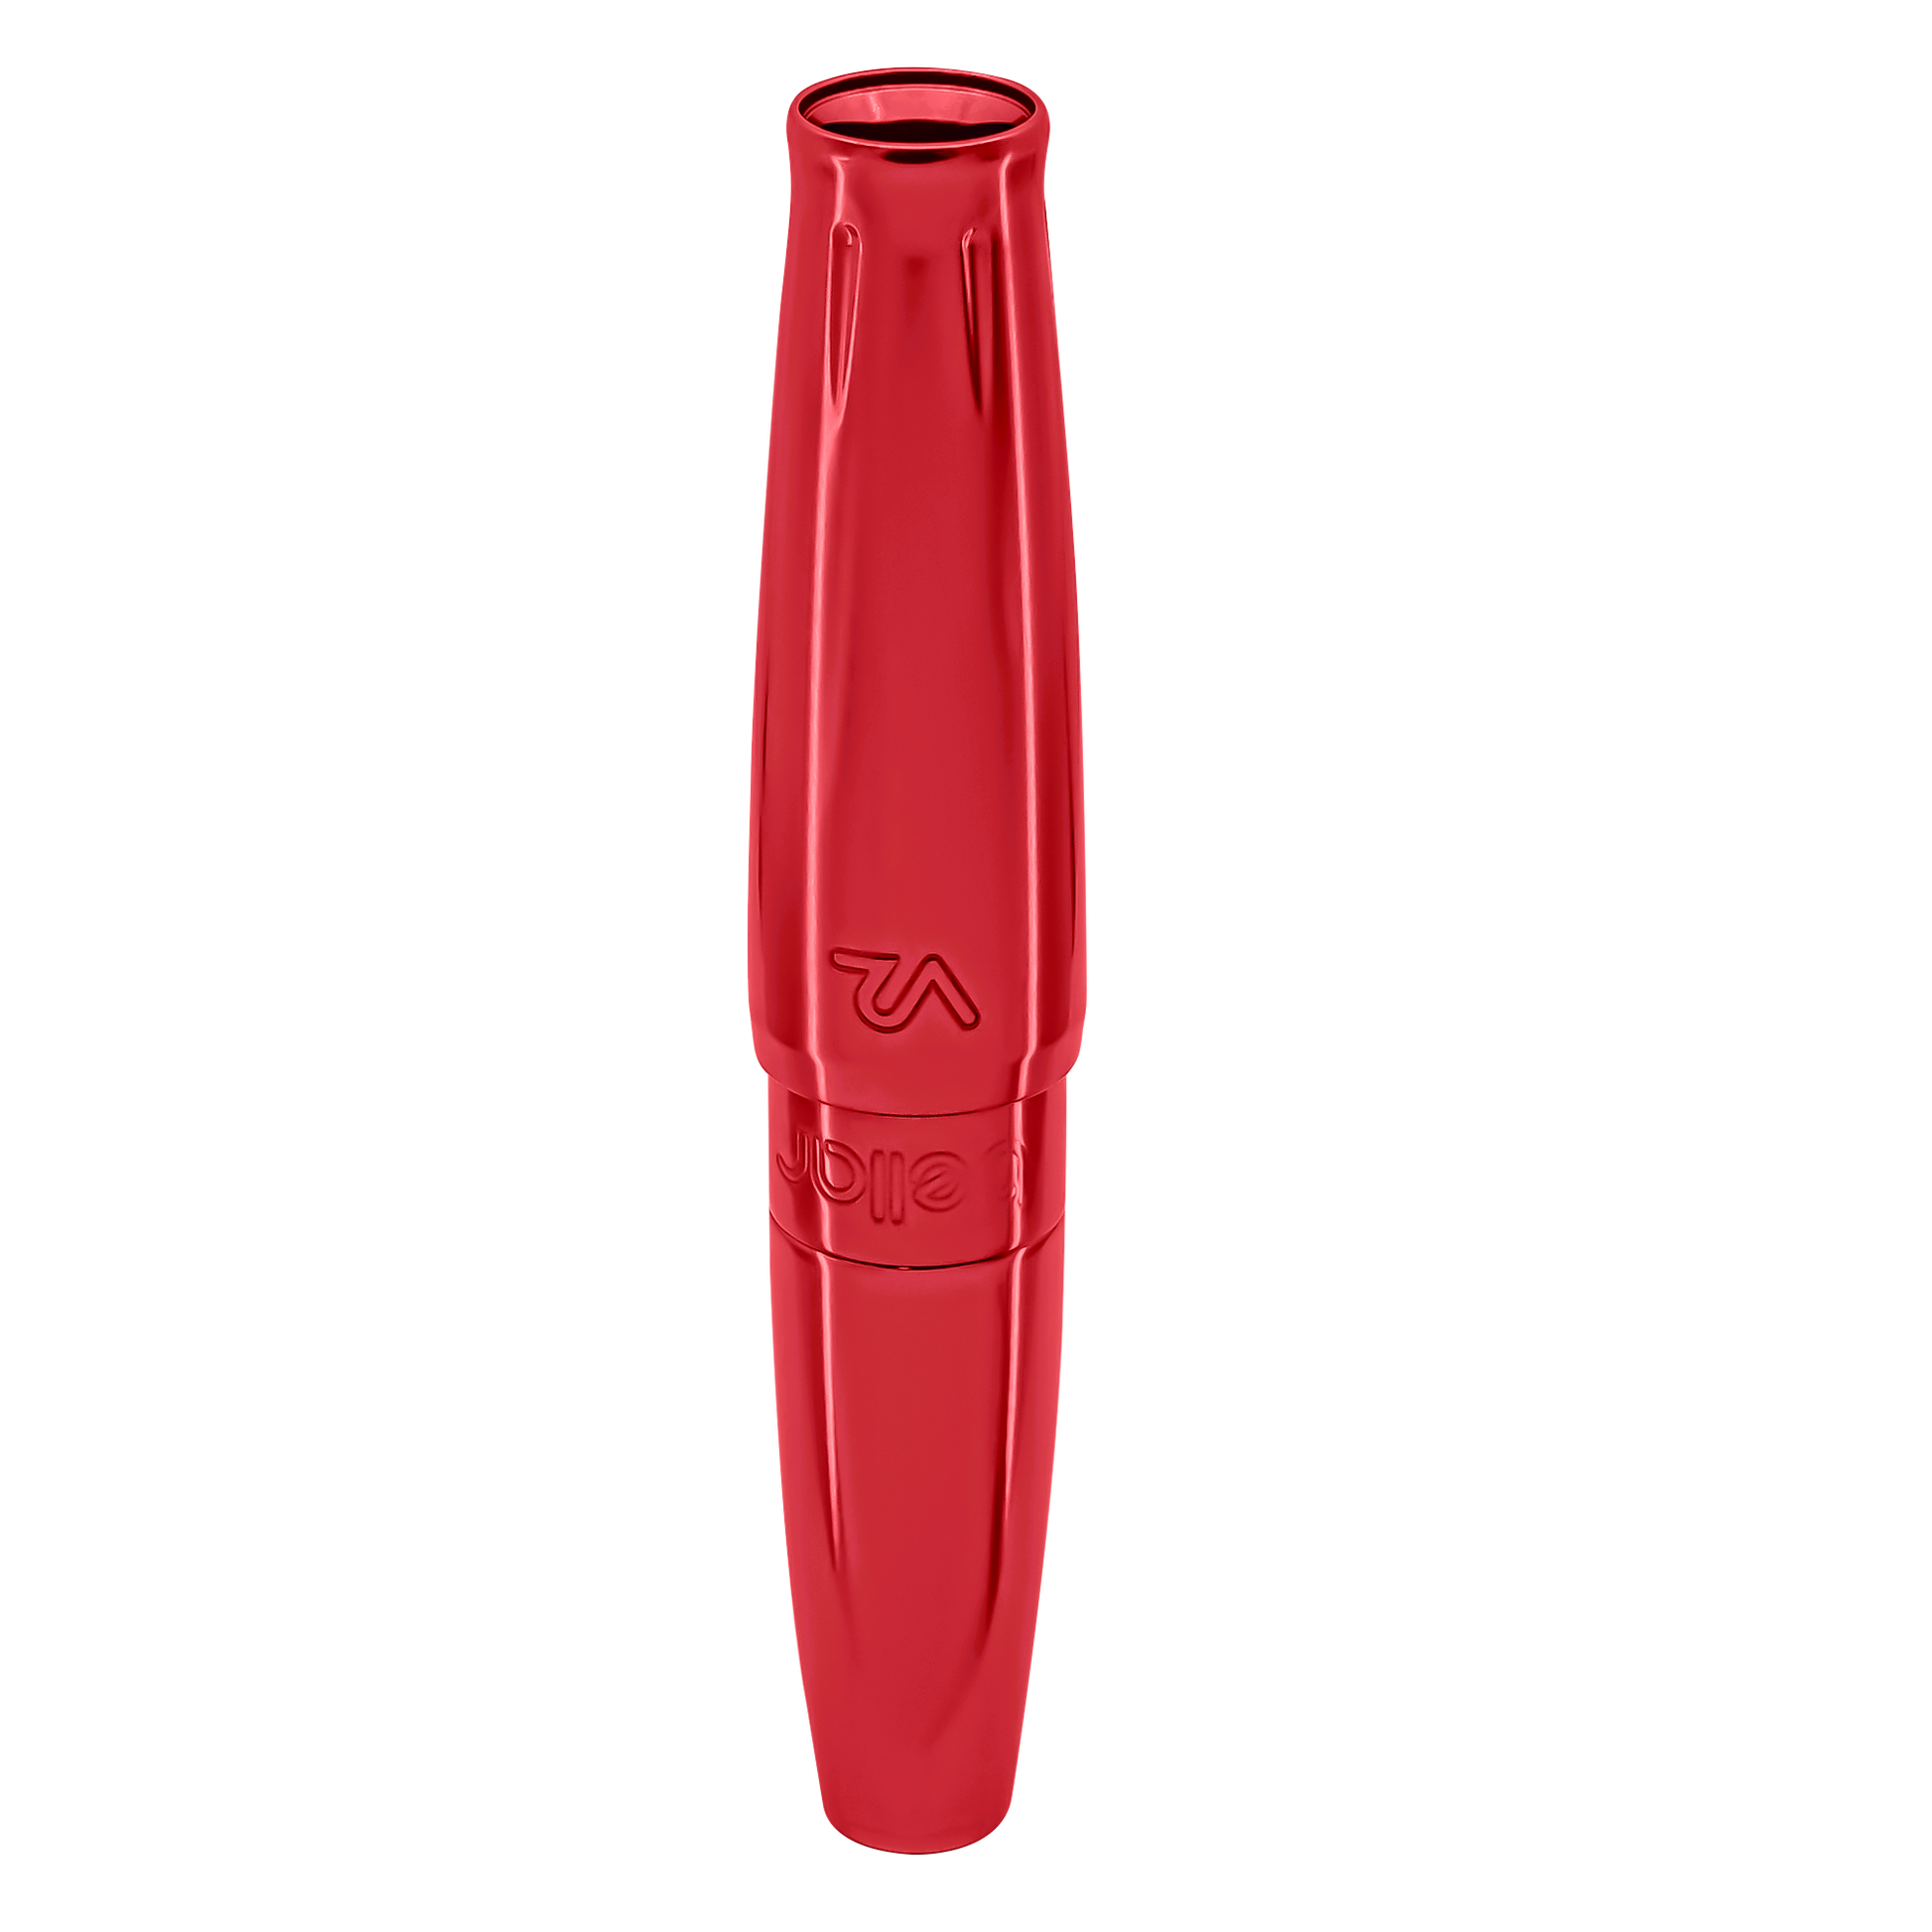 Bellar V2 Limited Edition Berry Red